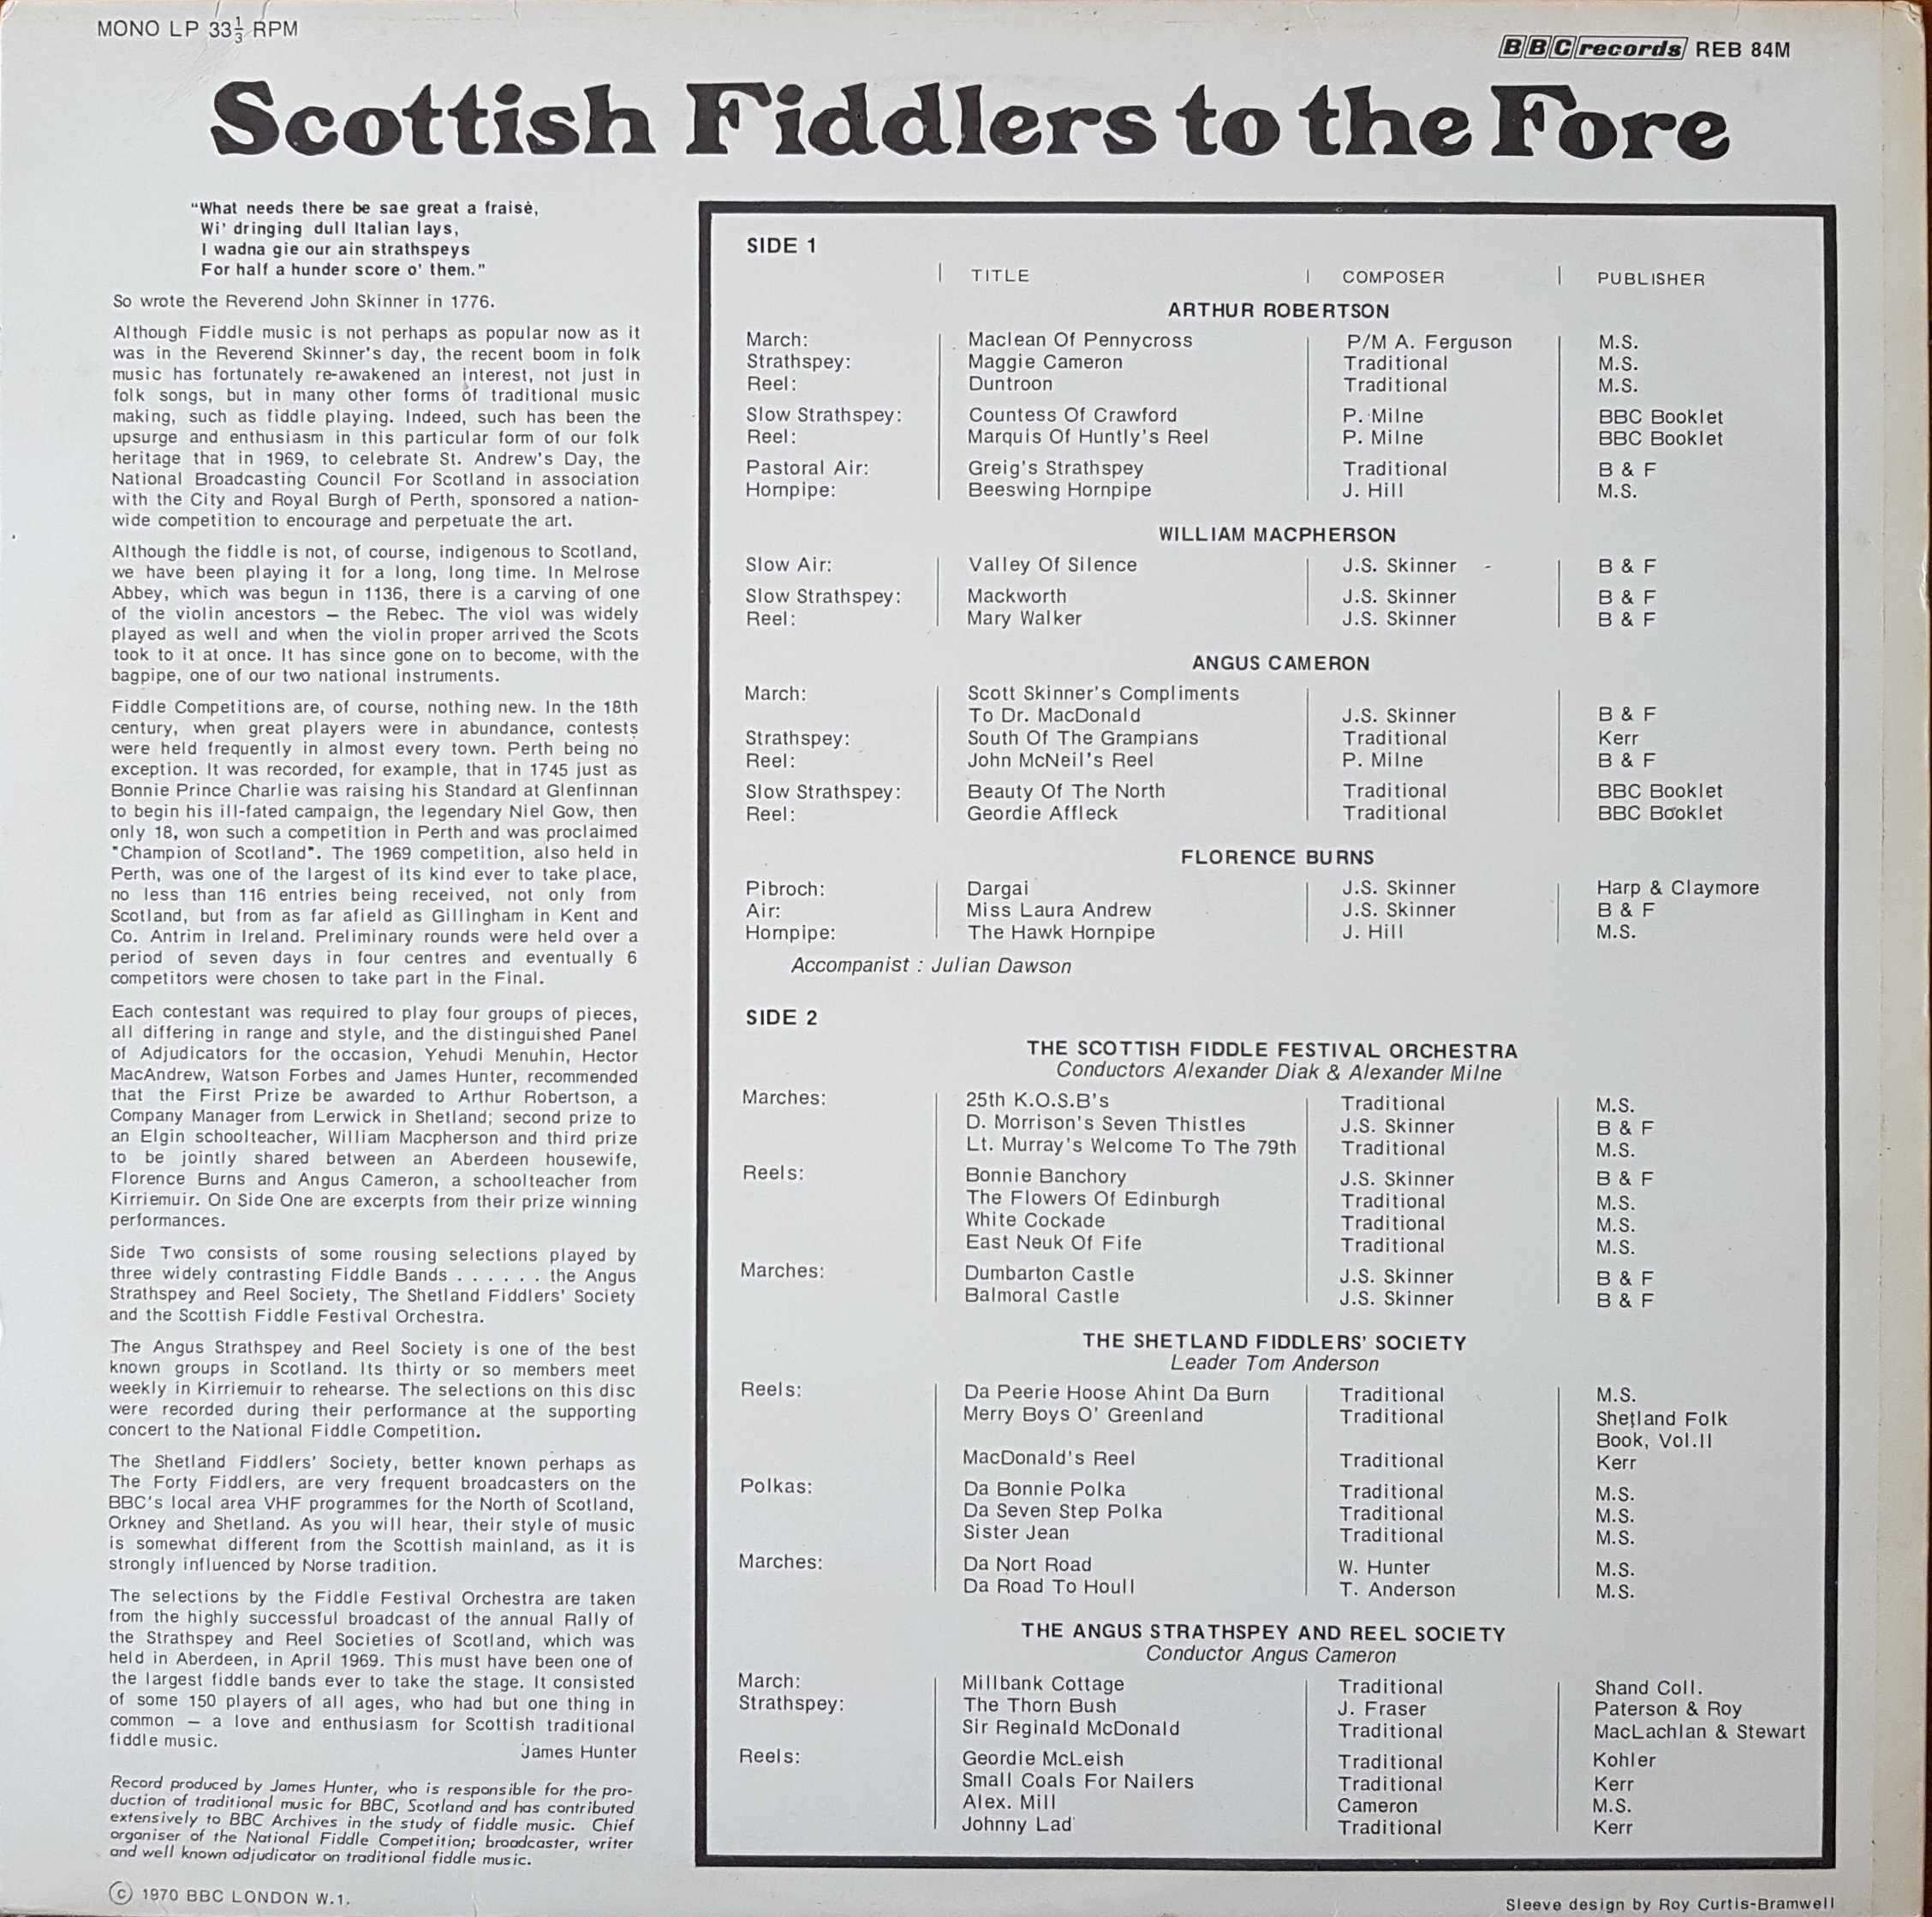 Picture of REB 84 Scottish fiddlers to the fore by artist Various from the BBC records and Tapes library